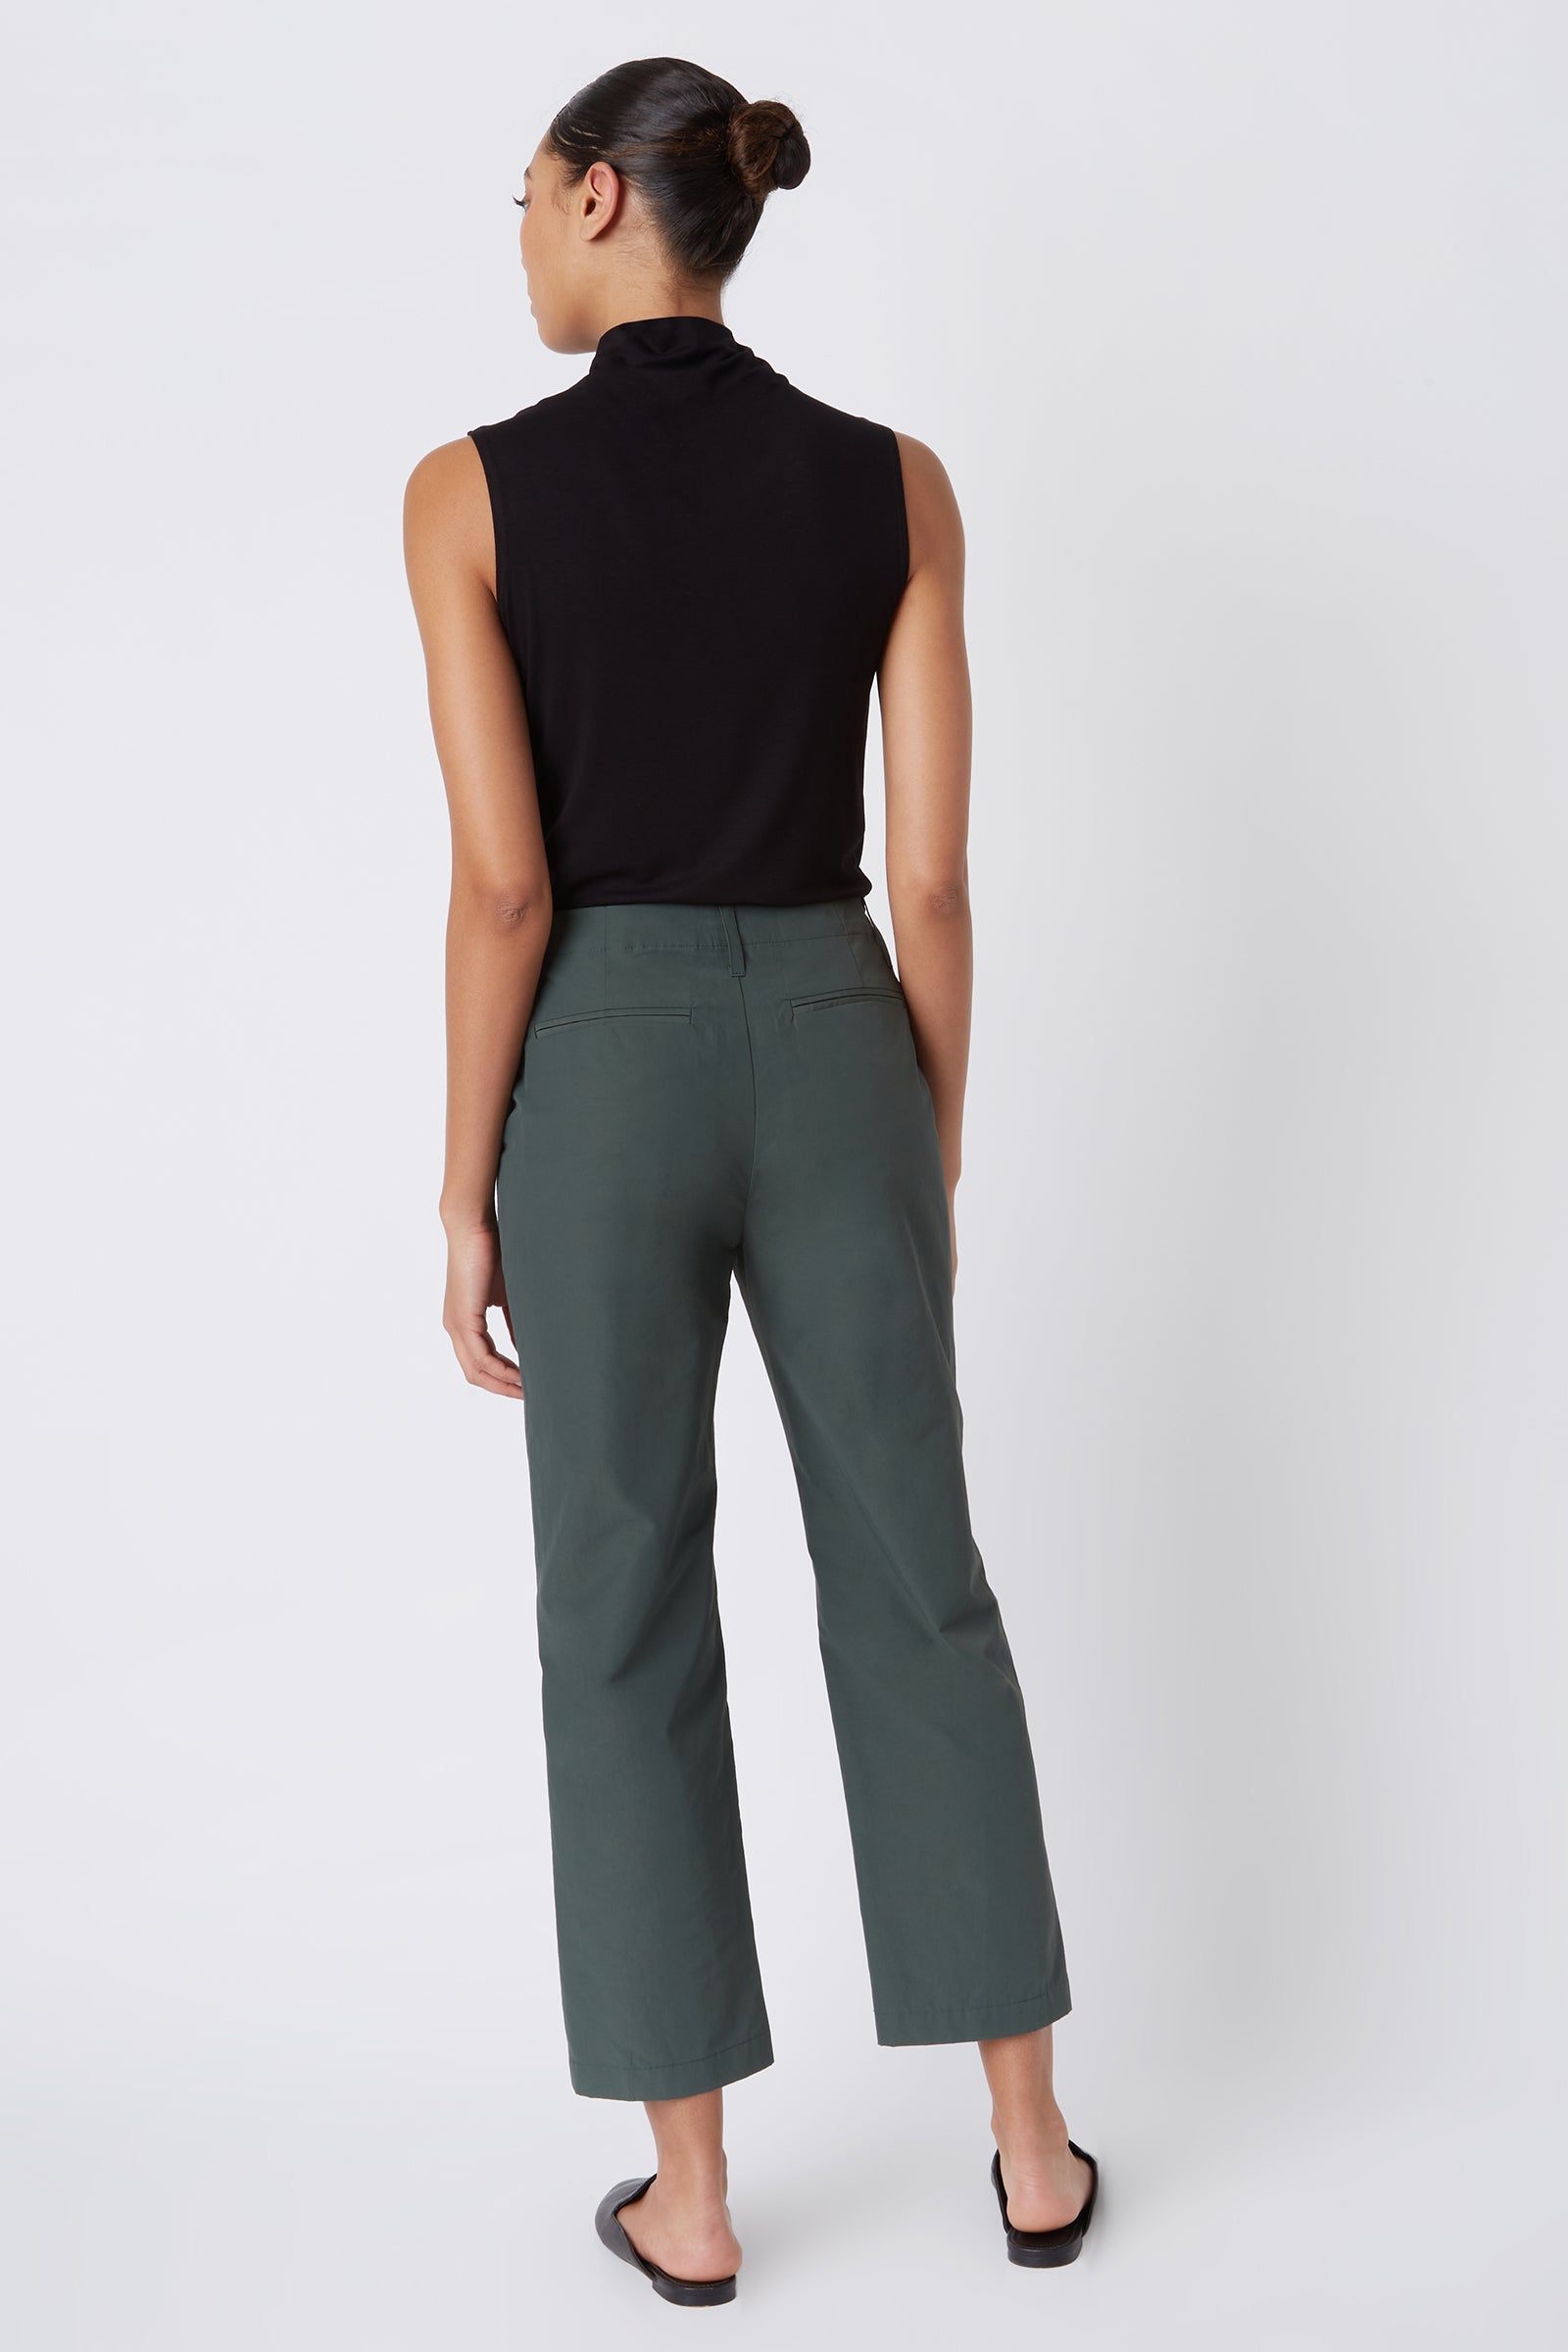 Kal Rieman Francoise Cigarette Pant in Loden Italian Broadcloth on Model with Hand on Neck Full Front View